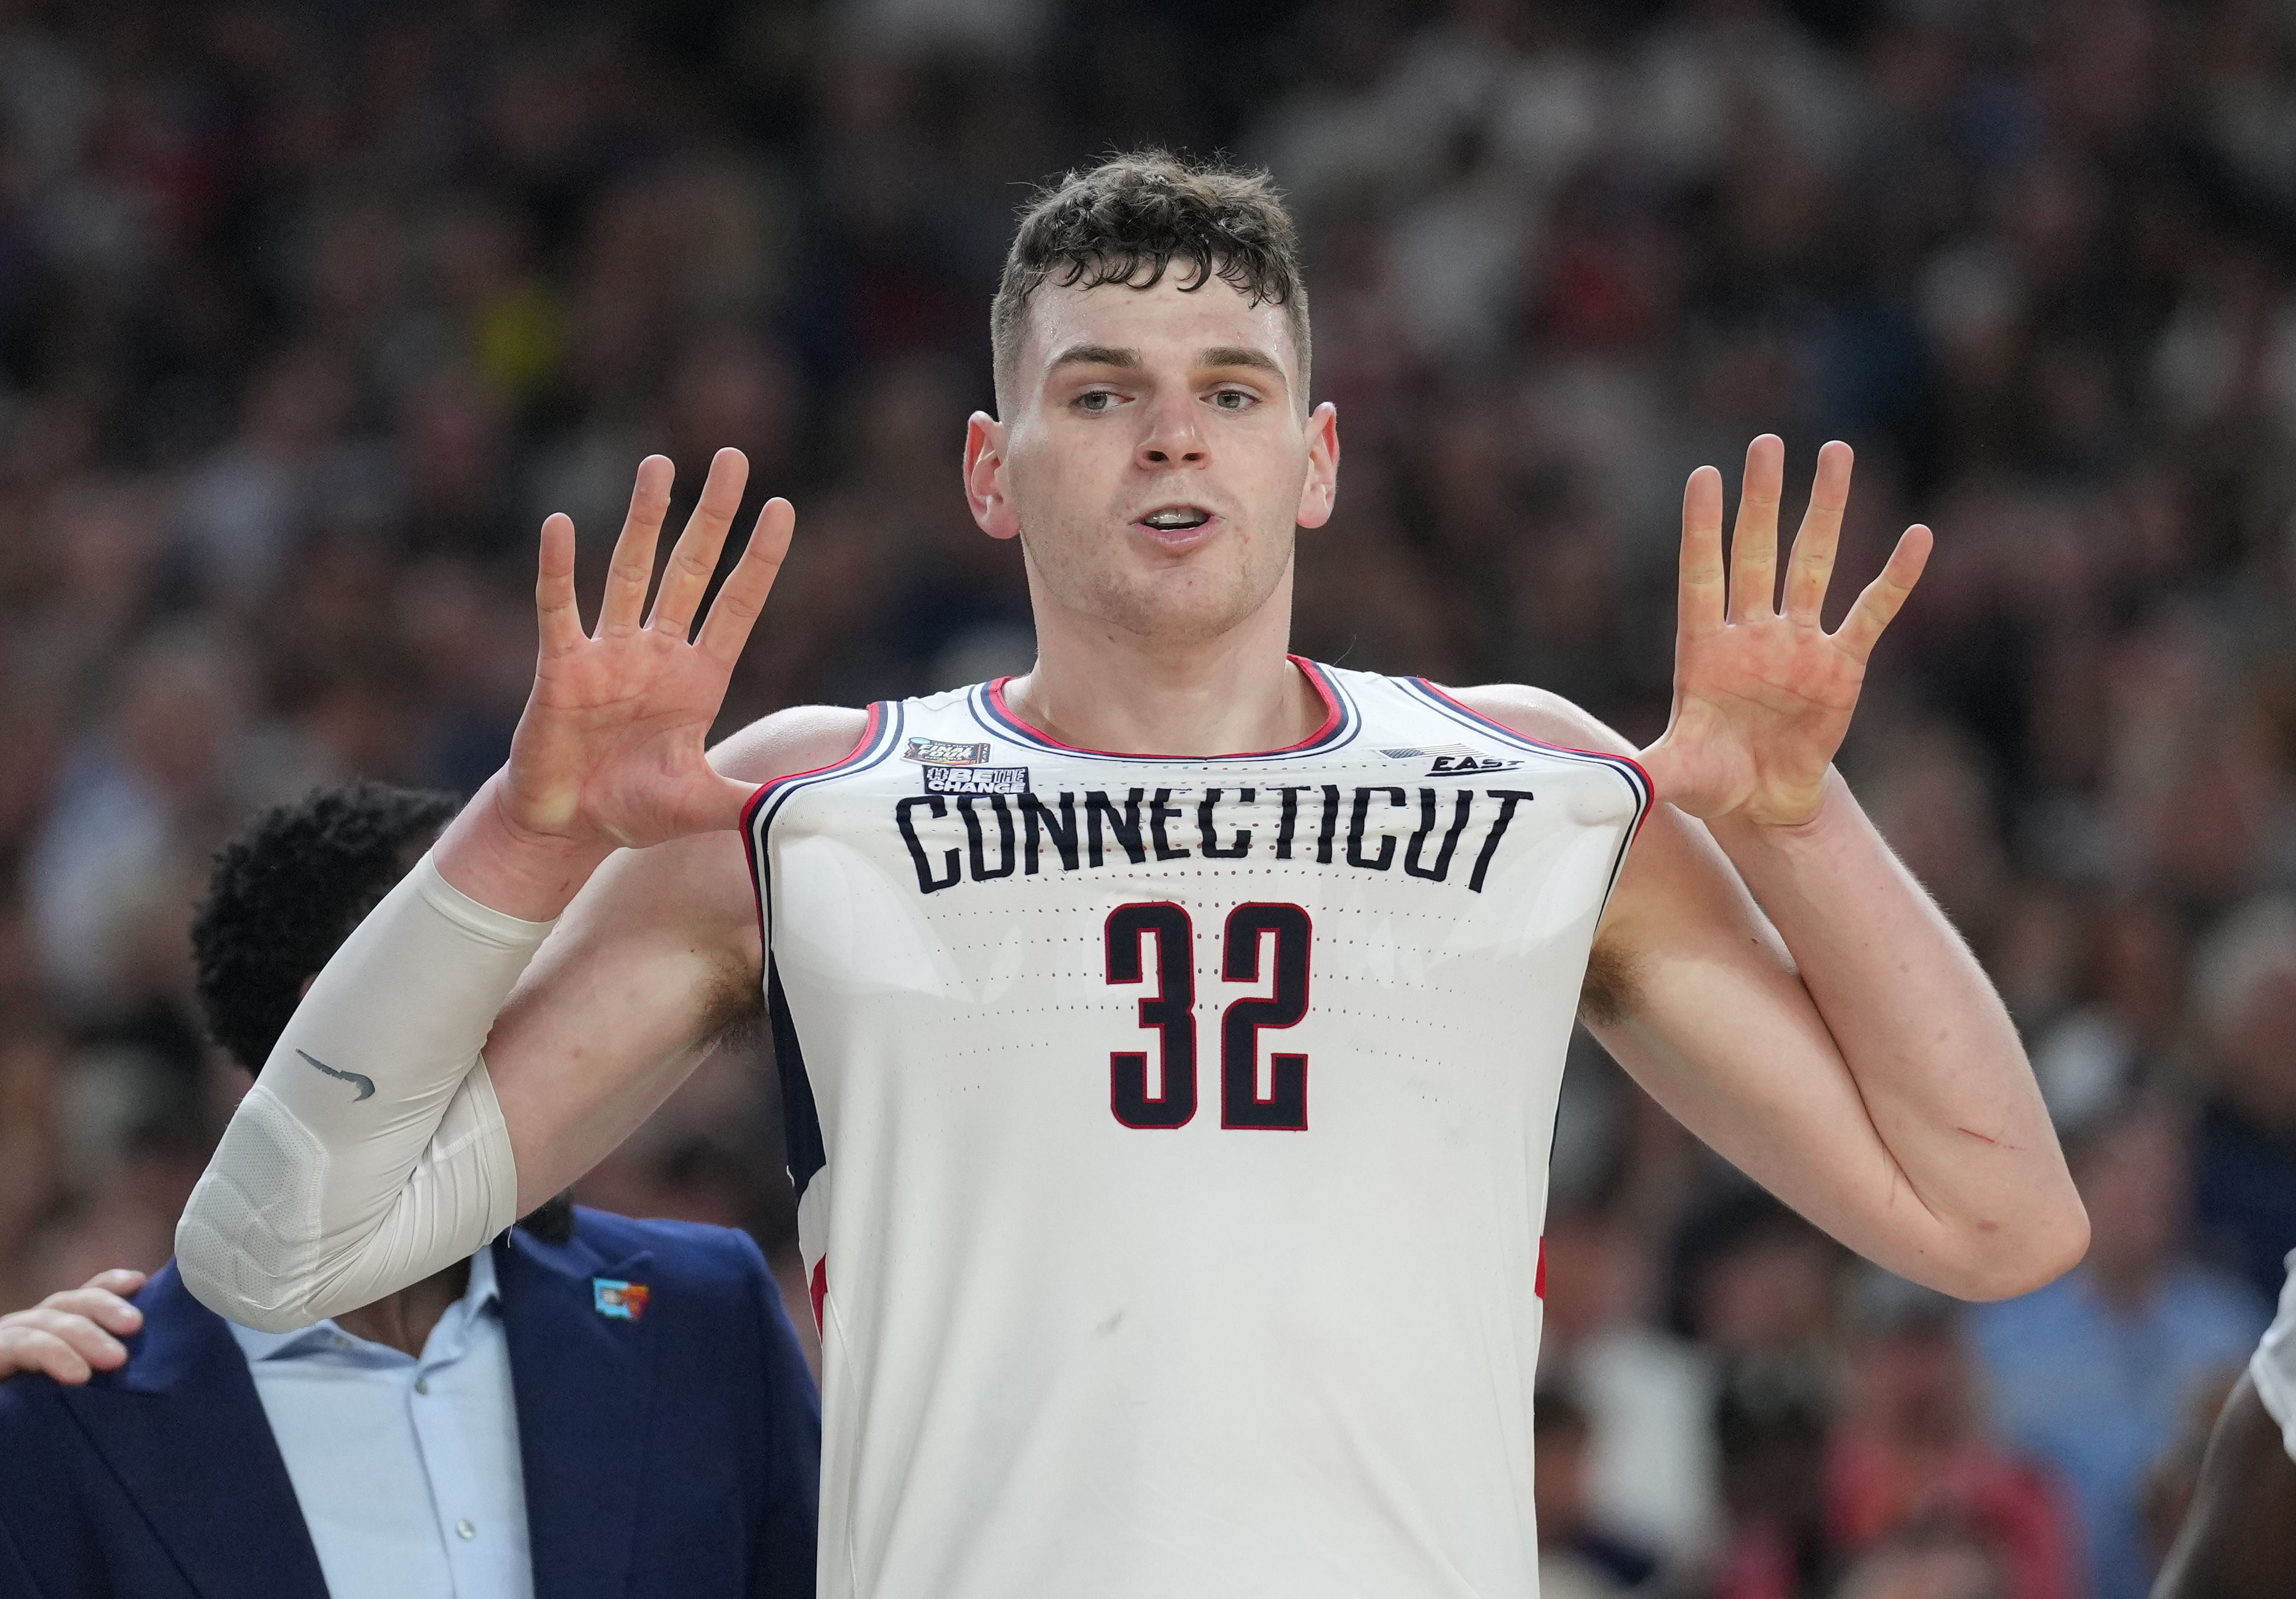 Donovan Clingan played quality minutes as a starting center for UConn.